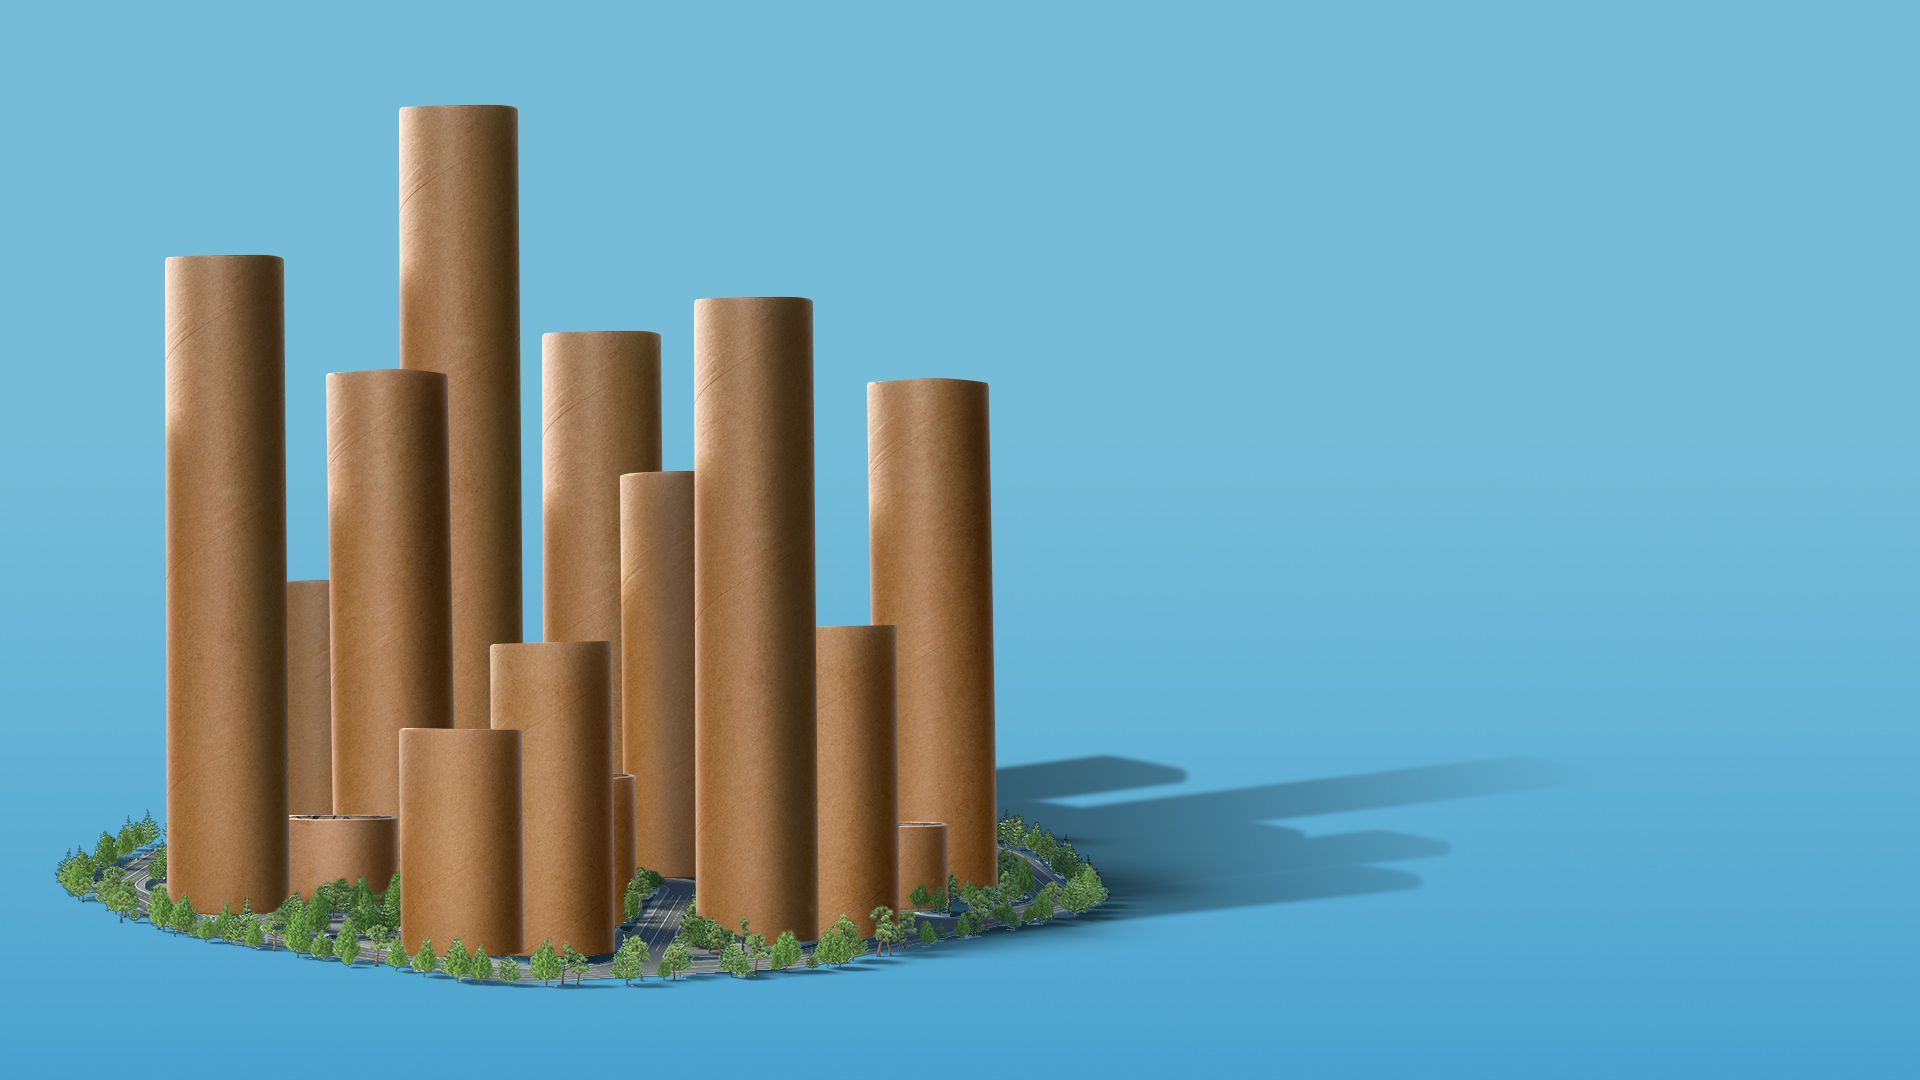 Illustration of toilet paper rolls as skyscrapers.